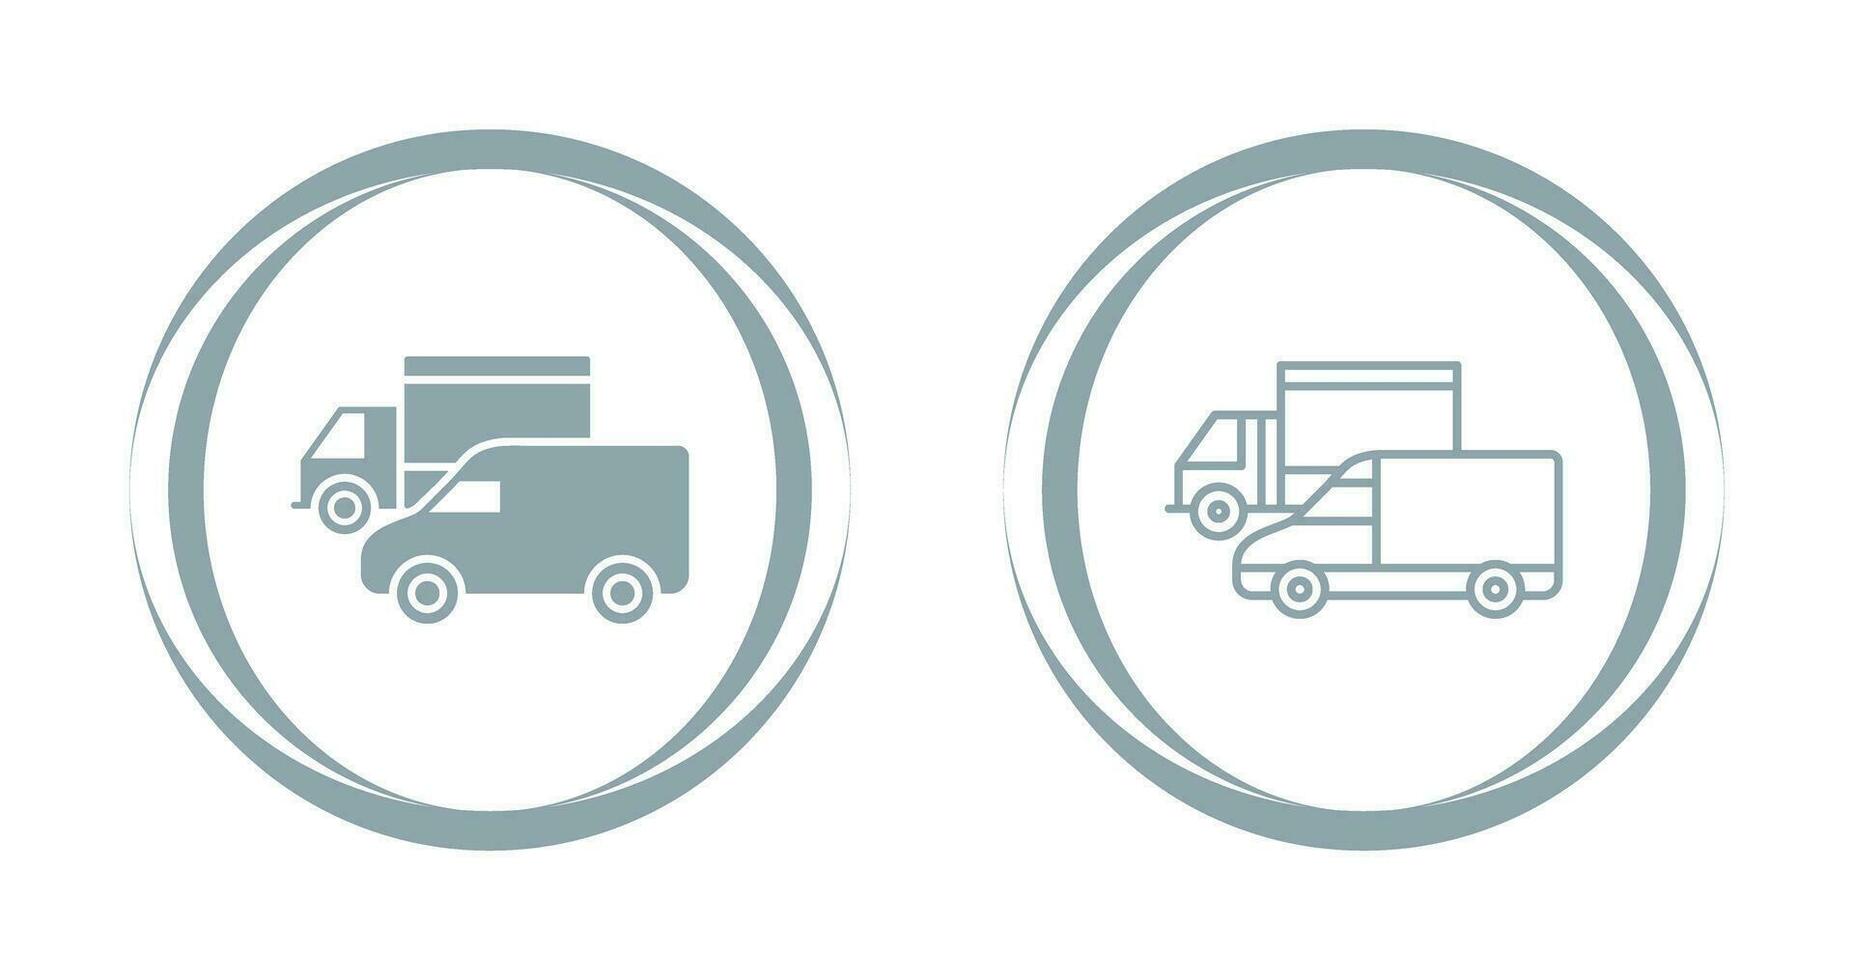 Parked Trucks Vector Icon